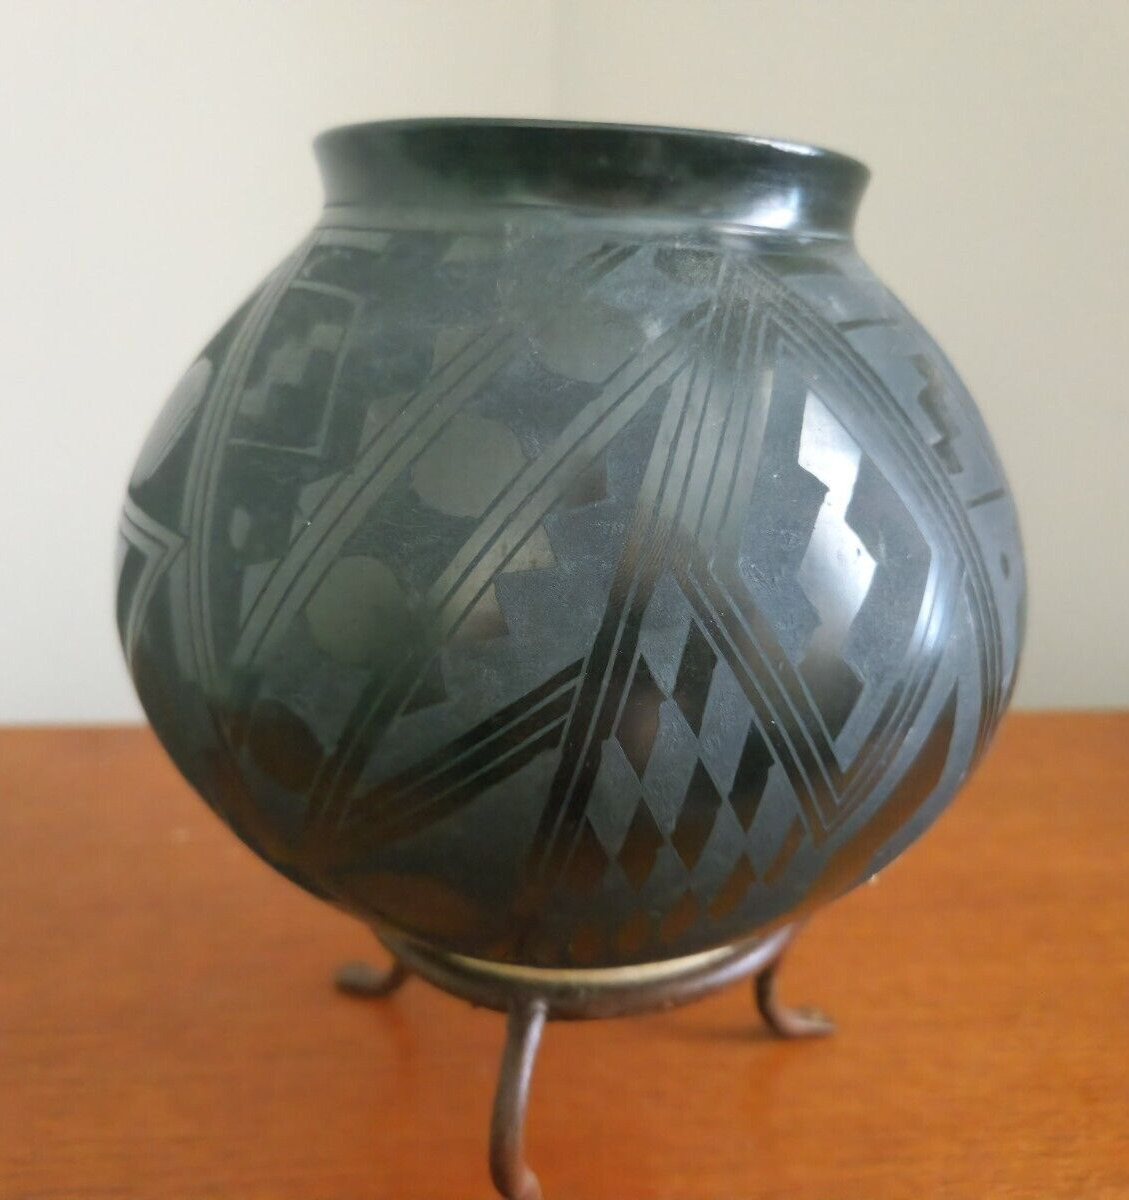 Black Pottery Bowl by David Ortiz from Mexico